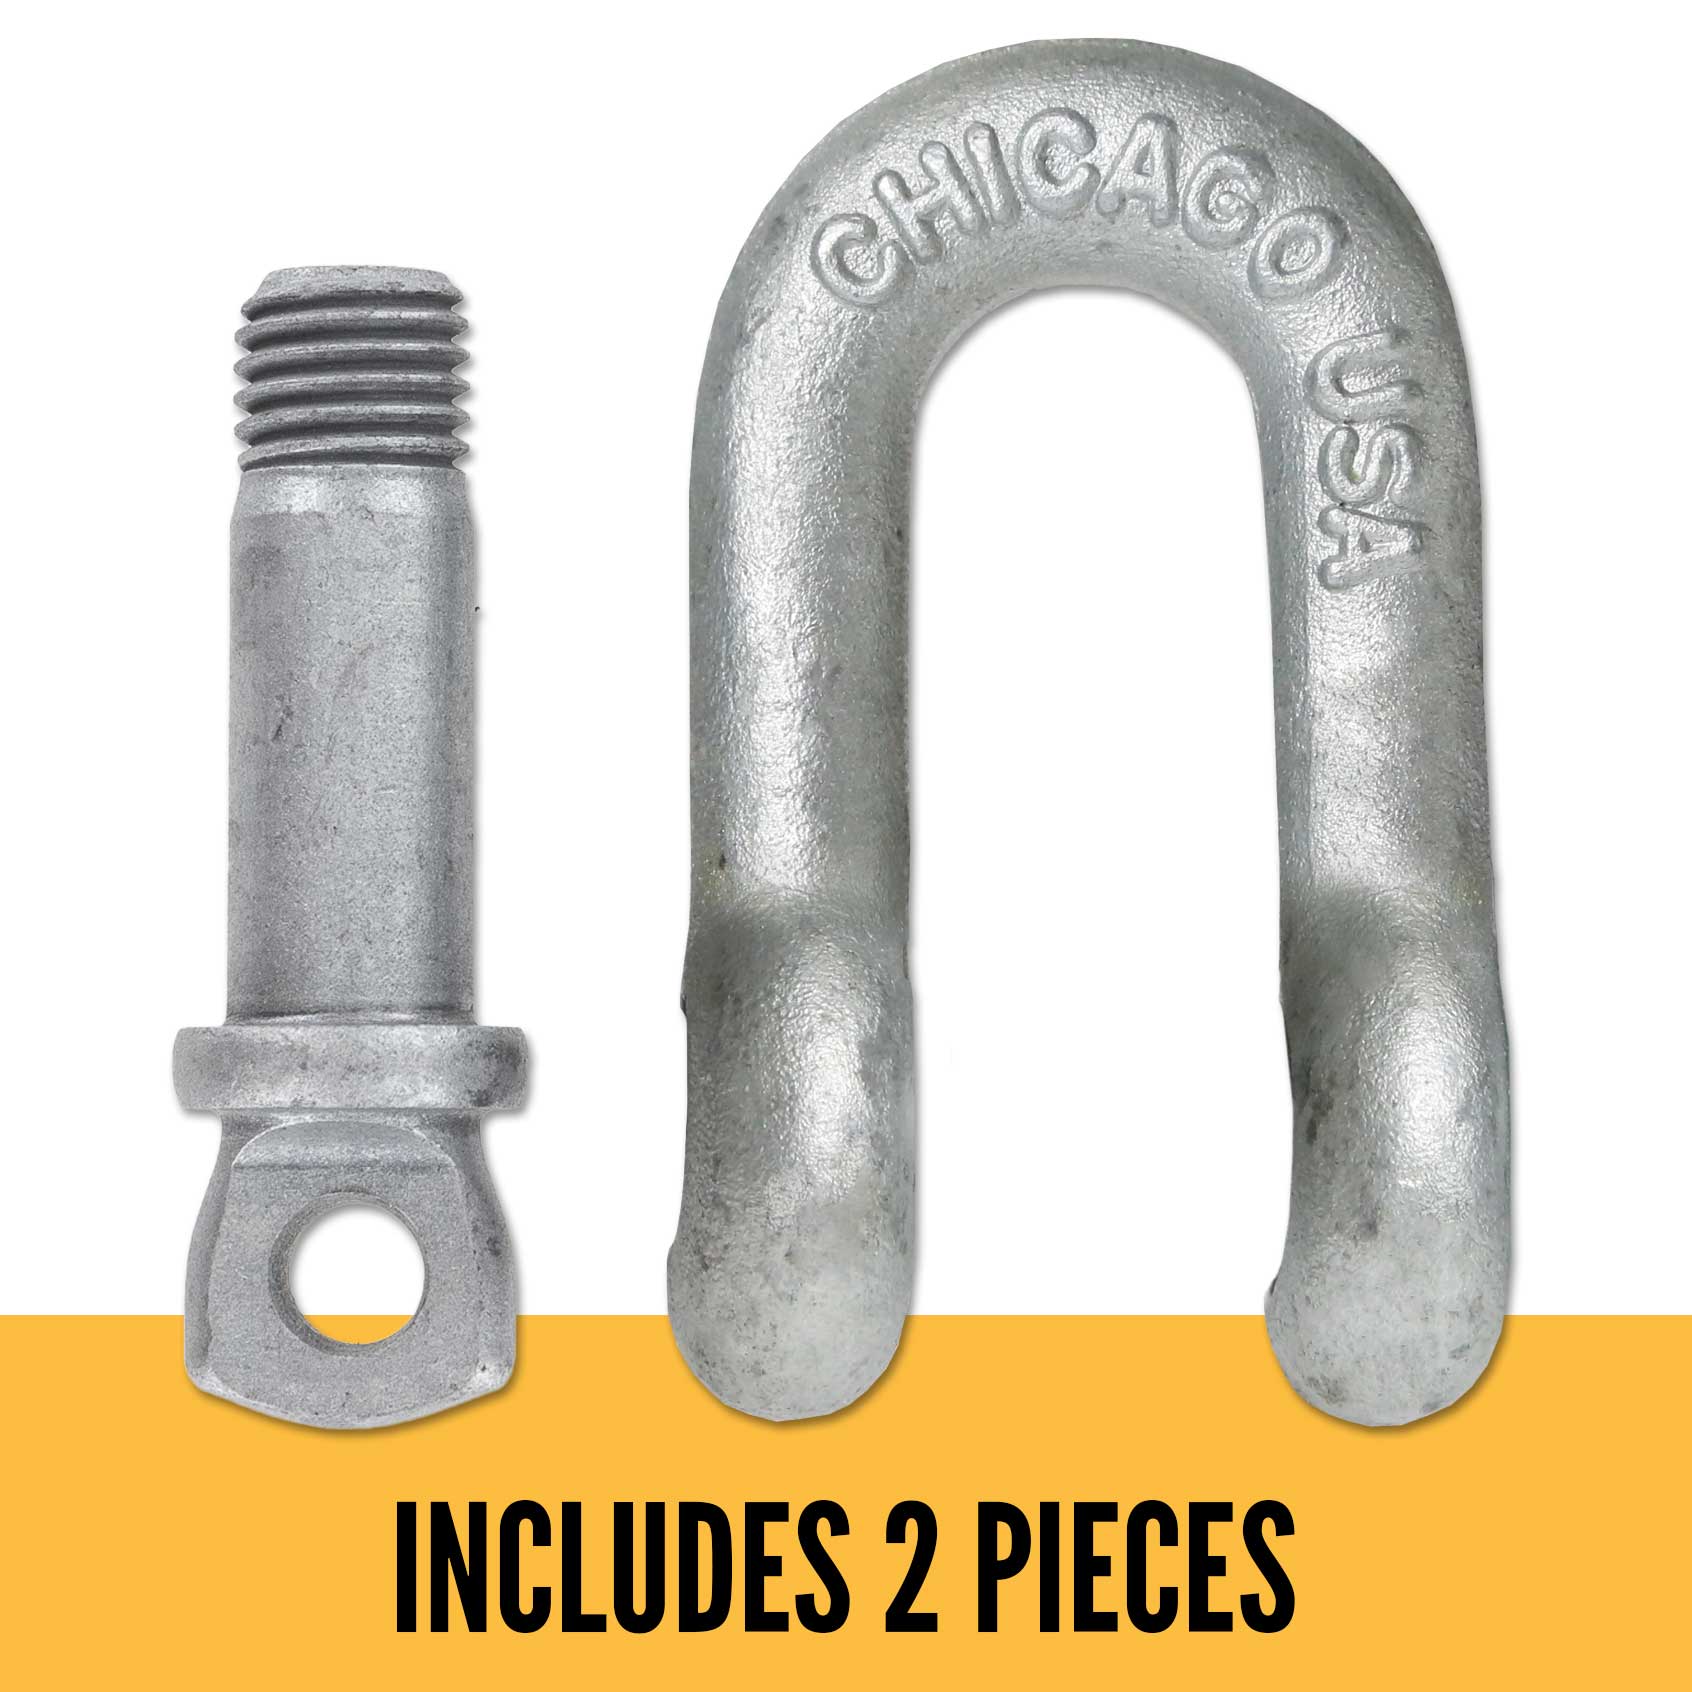 Screw Pin Chain Shackle - Chicago Hardware - 3/8" Galvanized Steel - 1 Ton parts of a shackle